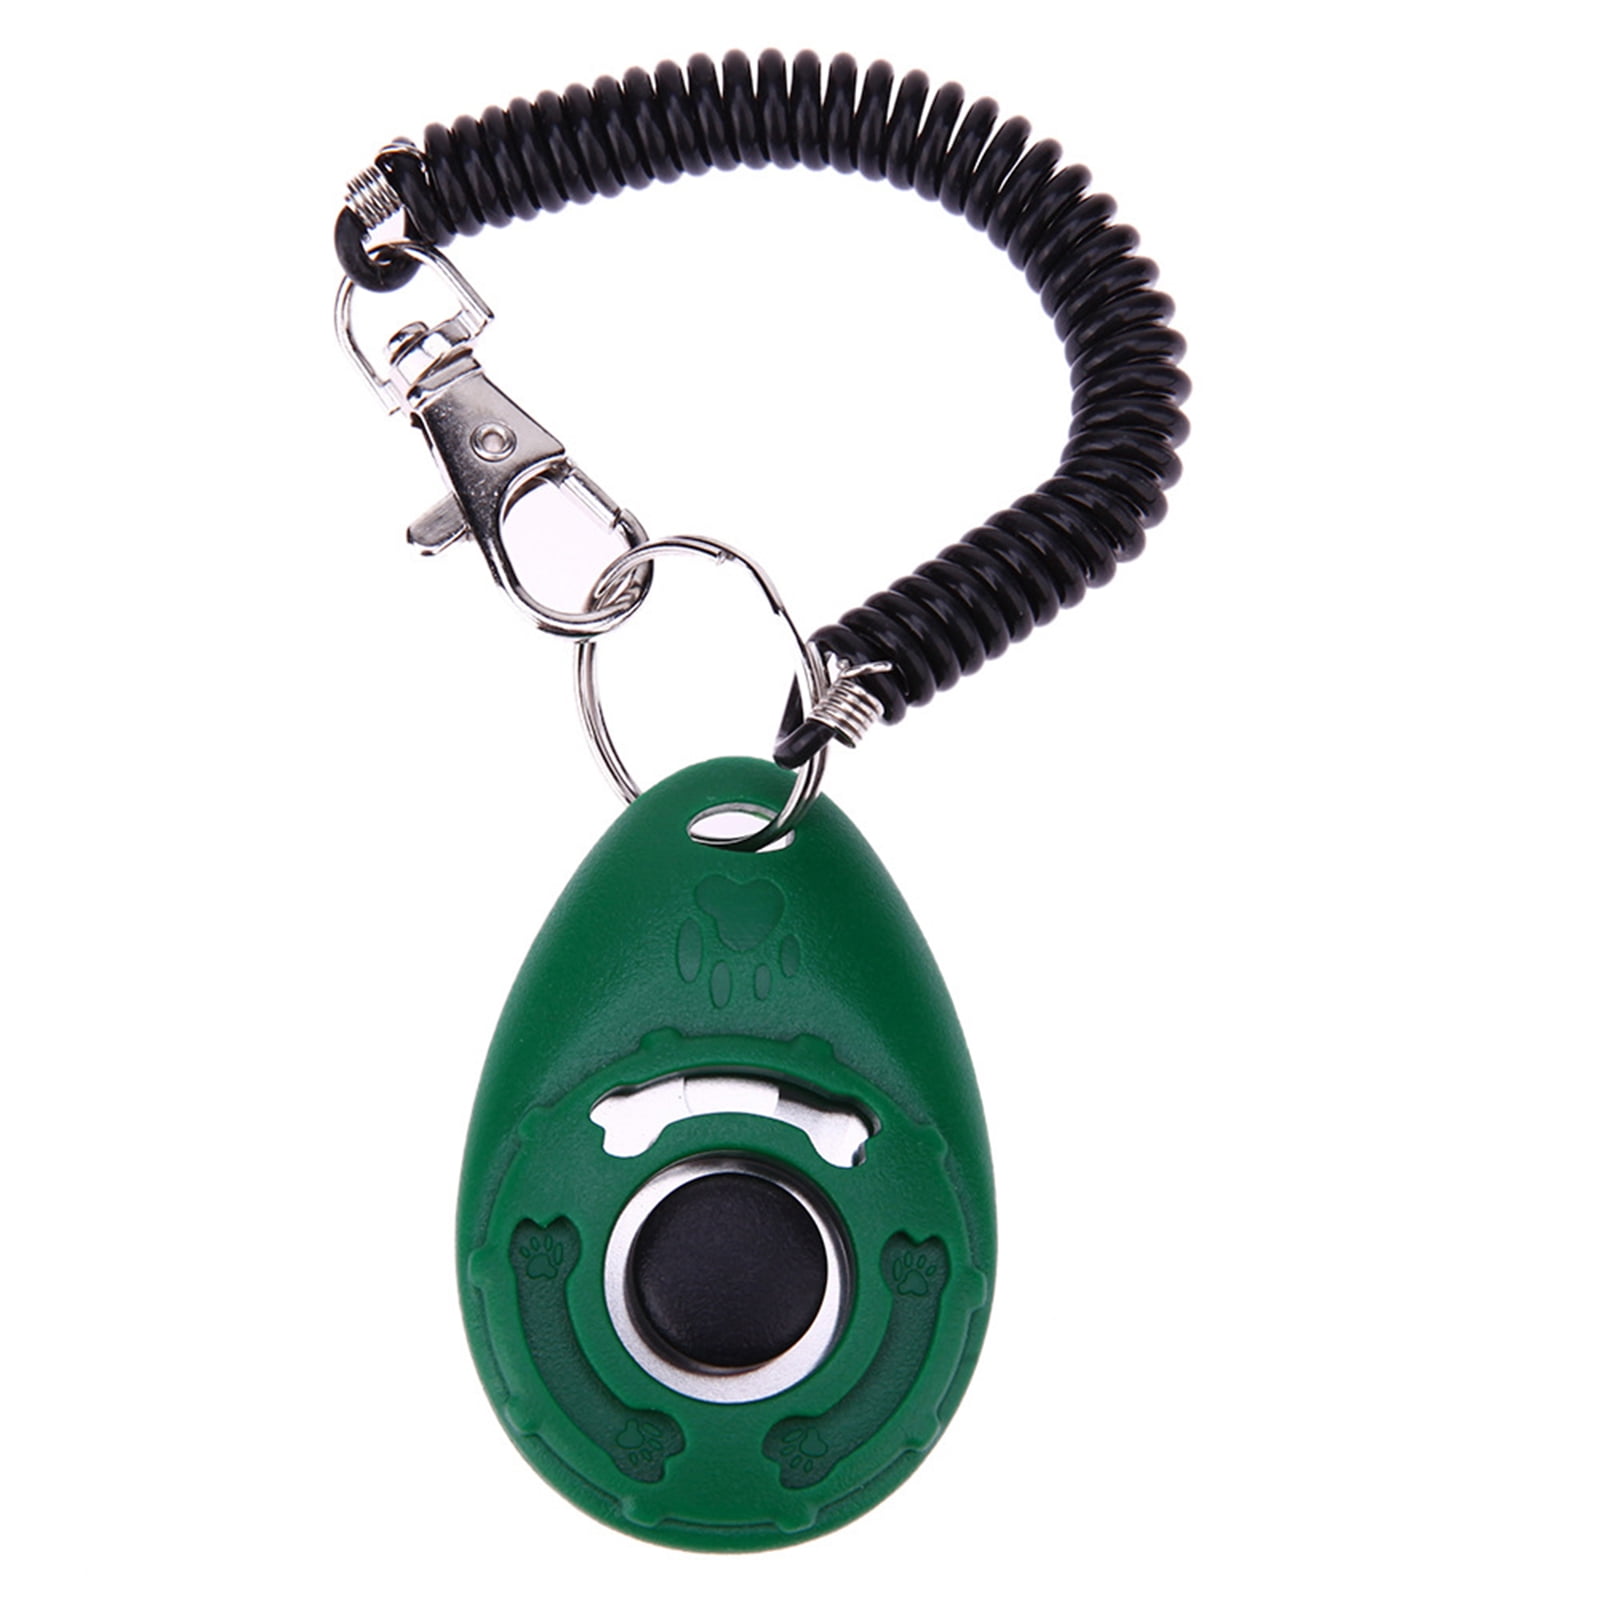 8 Pieces Dog Training Set Include Adjustable Sound Dog Training Whistle  with Lanyard Training Clicker Dog Training Bell and Dog Squeak Lighting  Ball